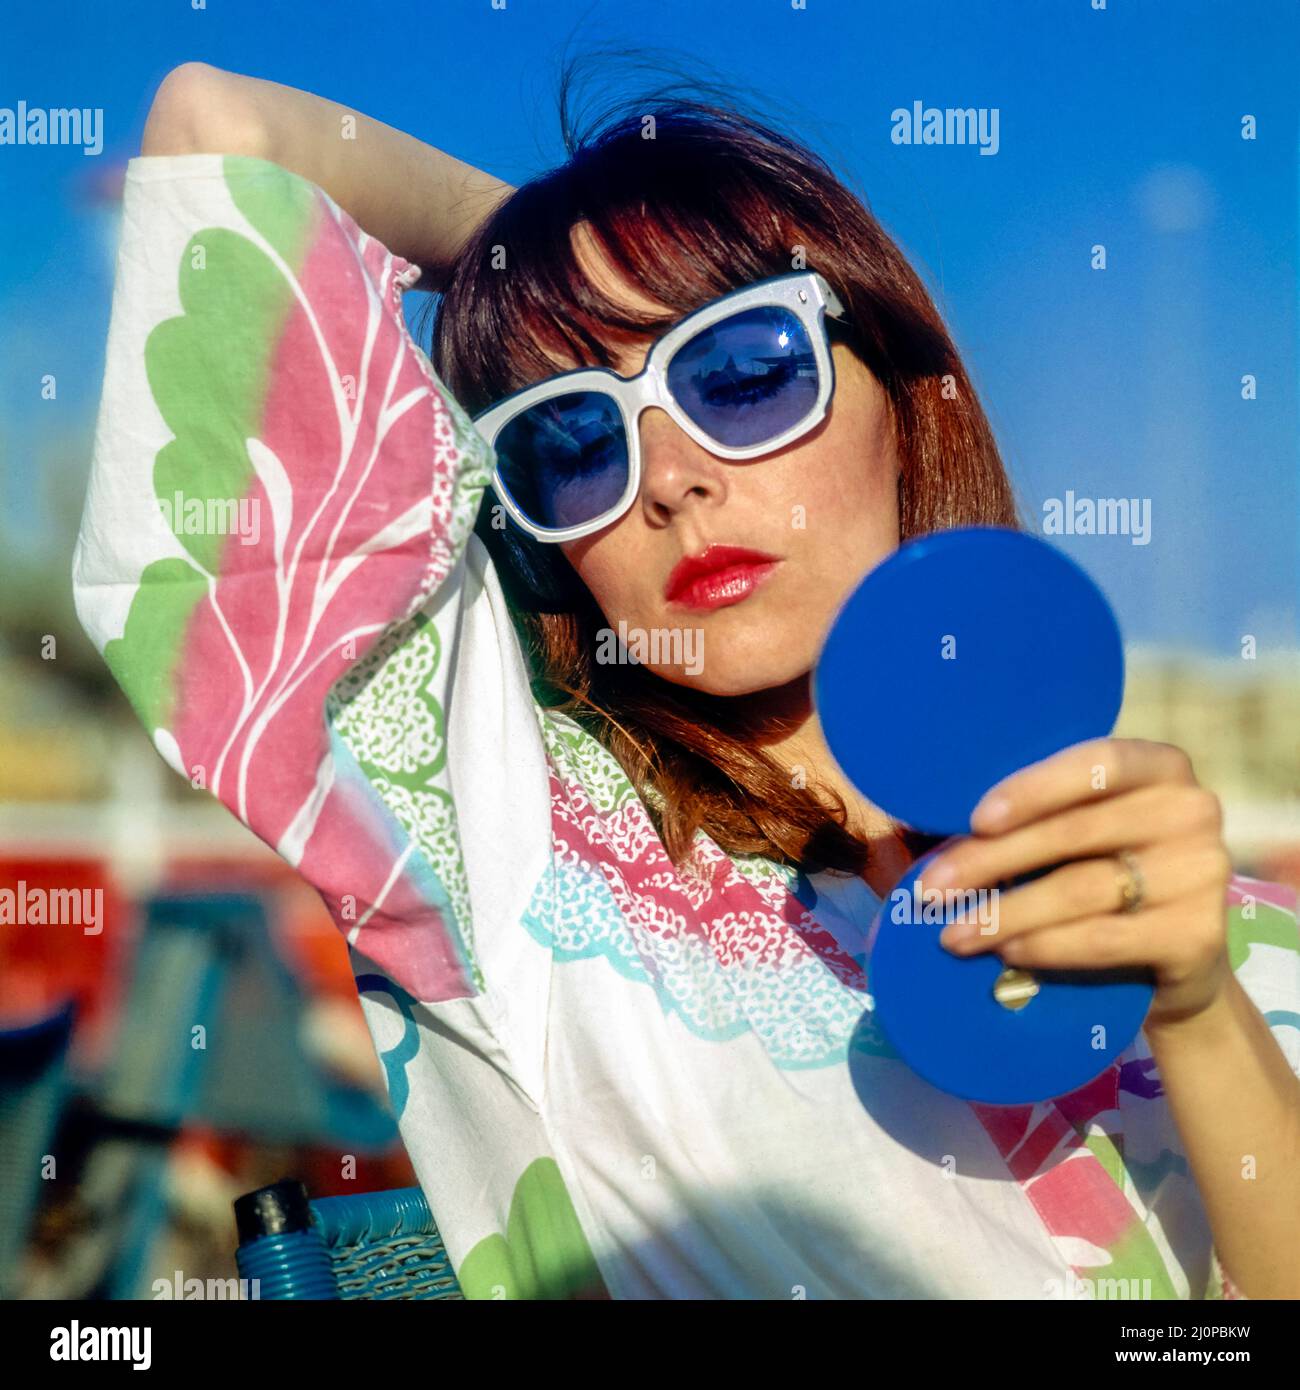 Vintage Italy 1970s, pretty woman with white sunglasses looking into a blue compact mirror checking her make up, Kursaal beach, Lido di Ostia, Europe, Stock Photo